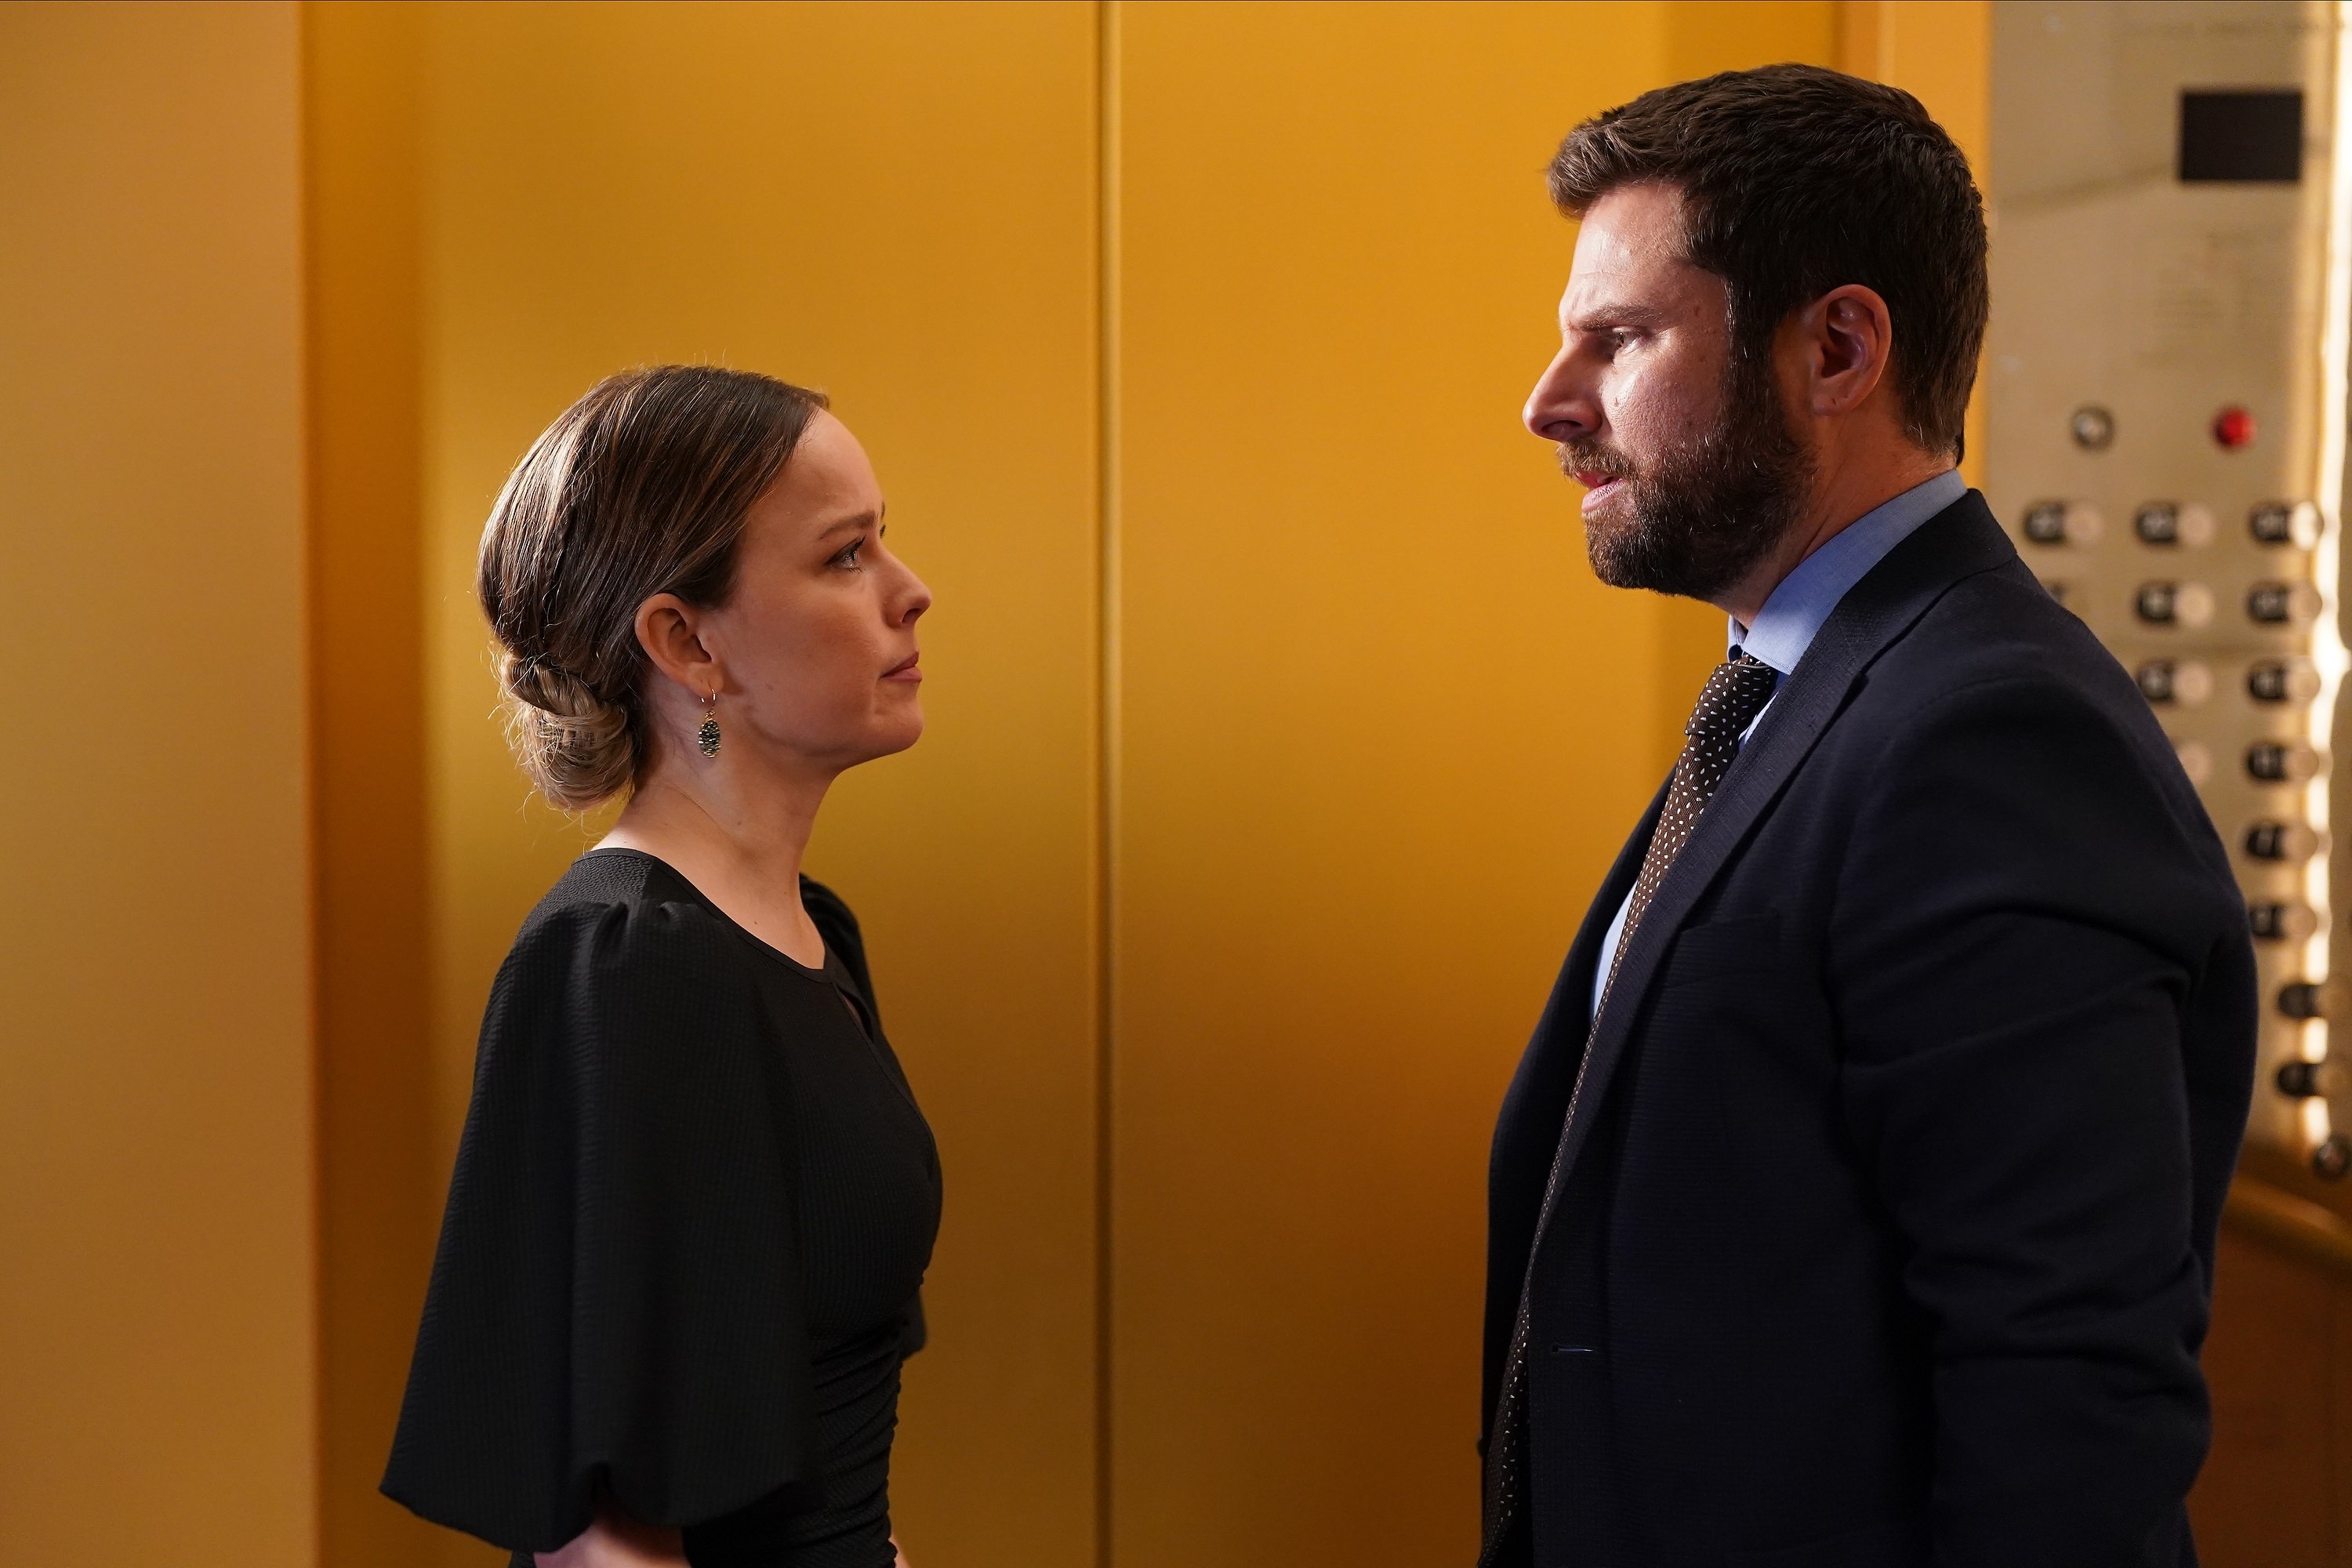 Cast of 'A Million Little Things' Allison Miller and James Roday Rodriguez stare at each other in an an elevator as Maggie and Gary